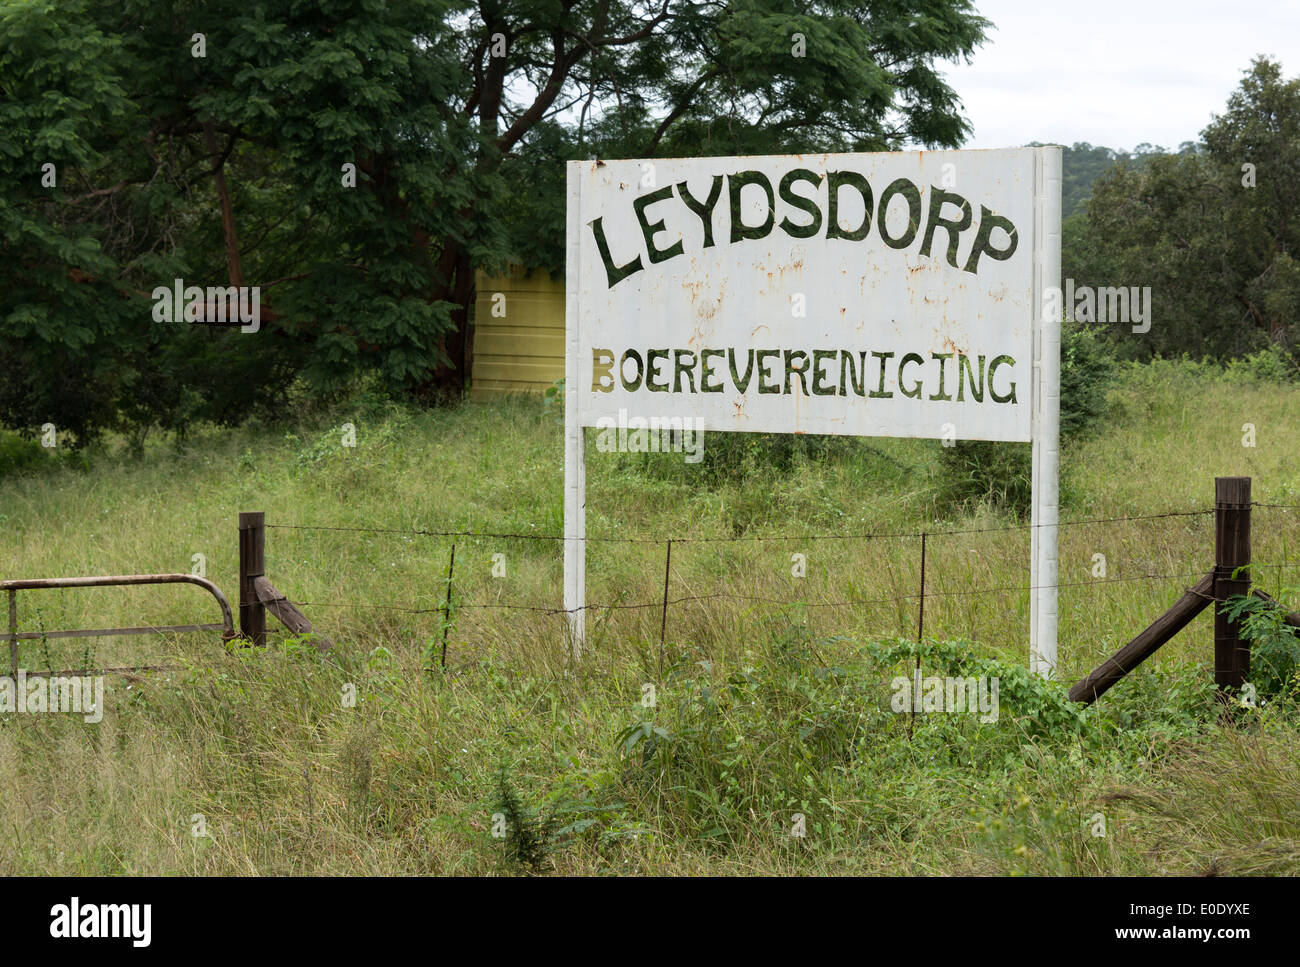 old abandon gold mine village leydsdorp in south arica with parking and restaurant sign Stock Photo